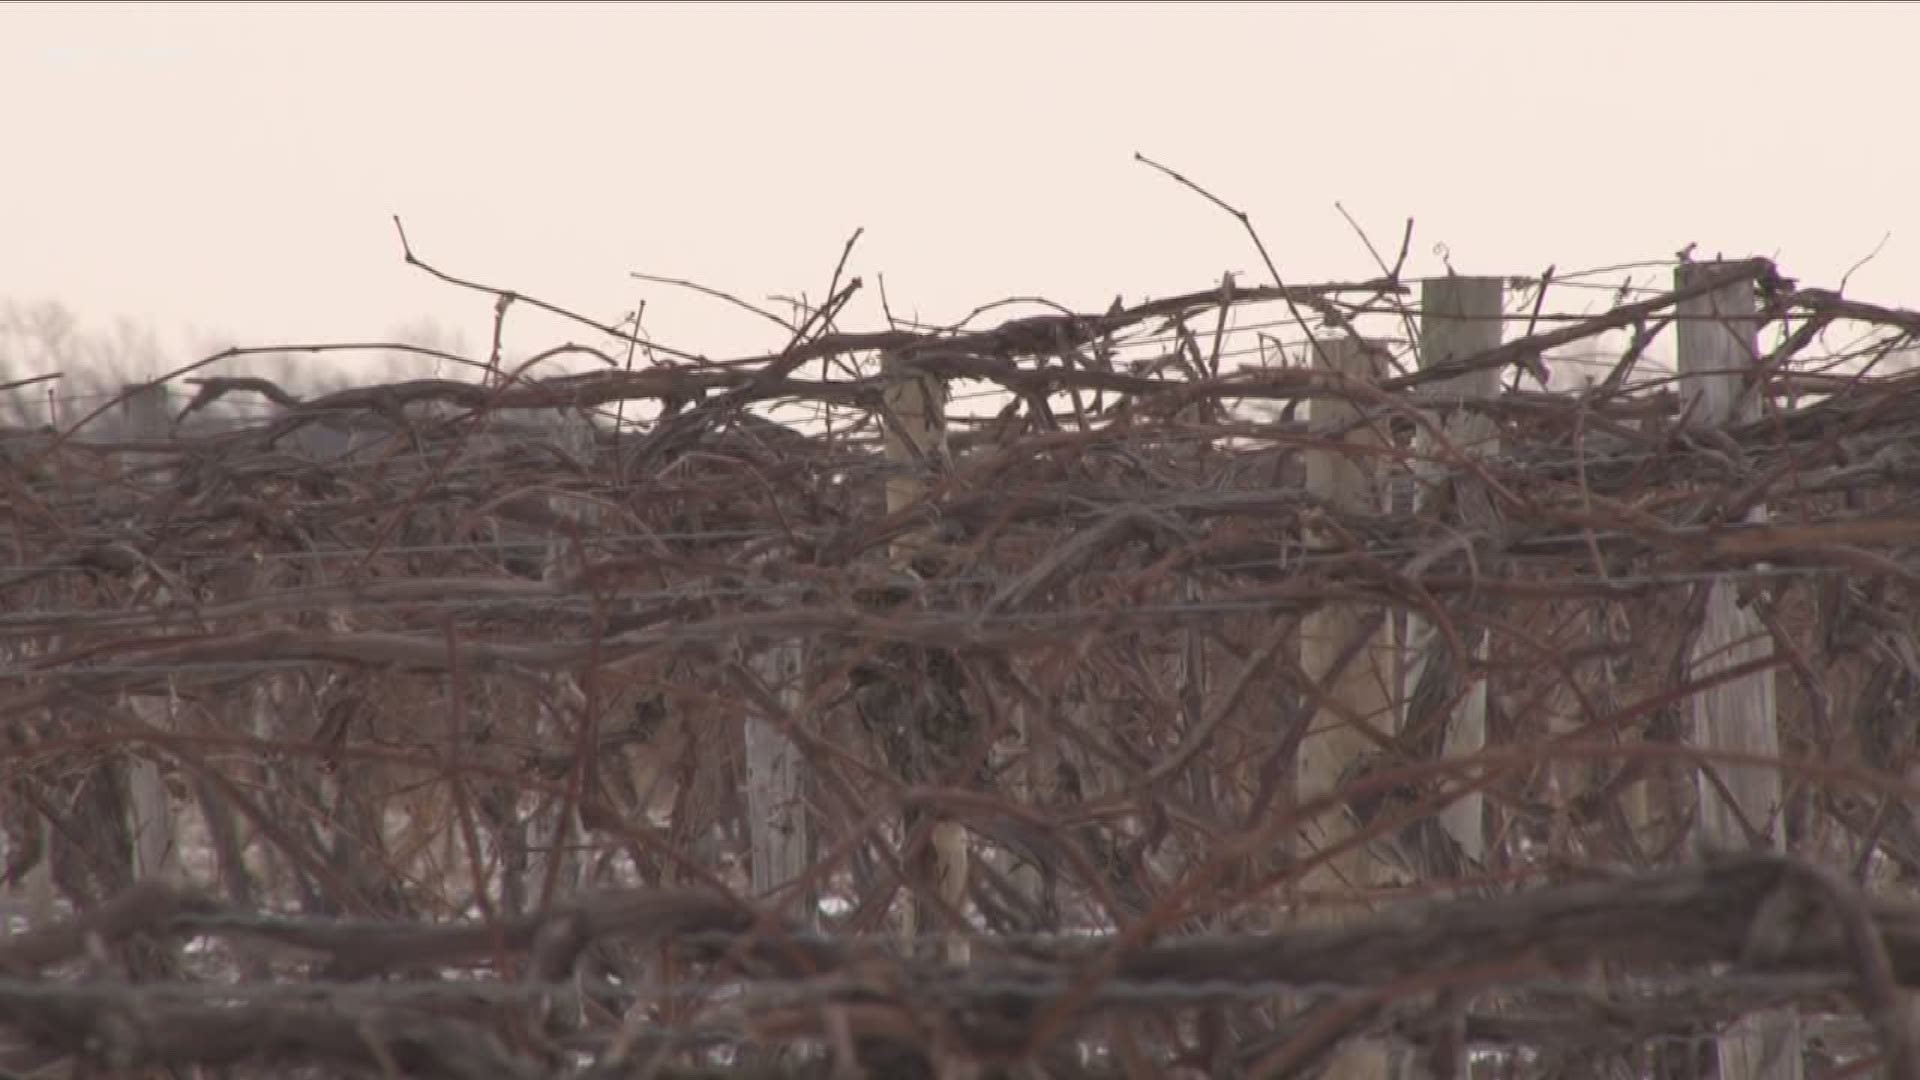 Up and down temperatures can cause damage on vines